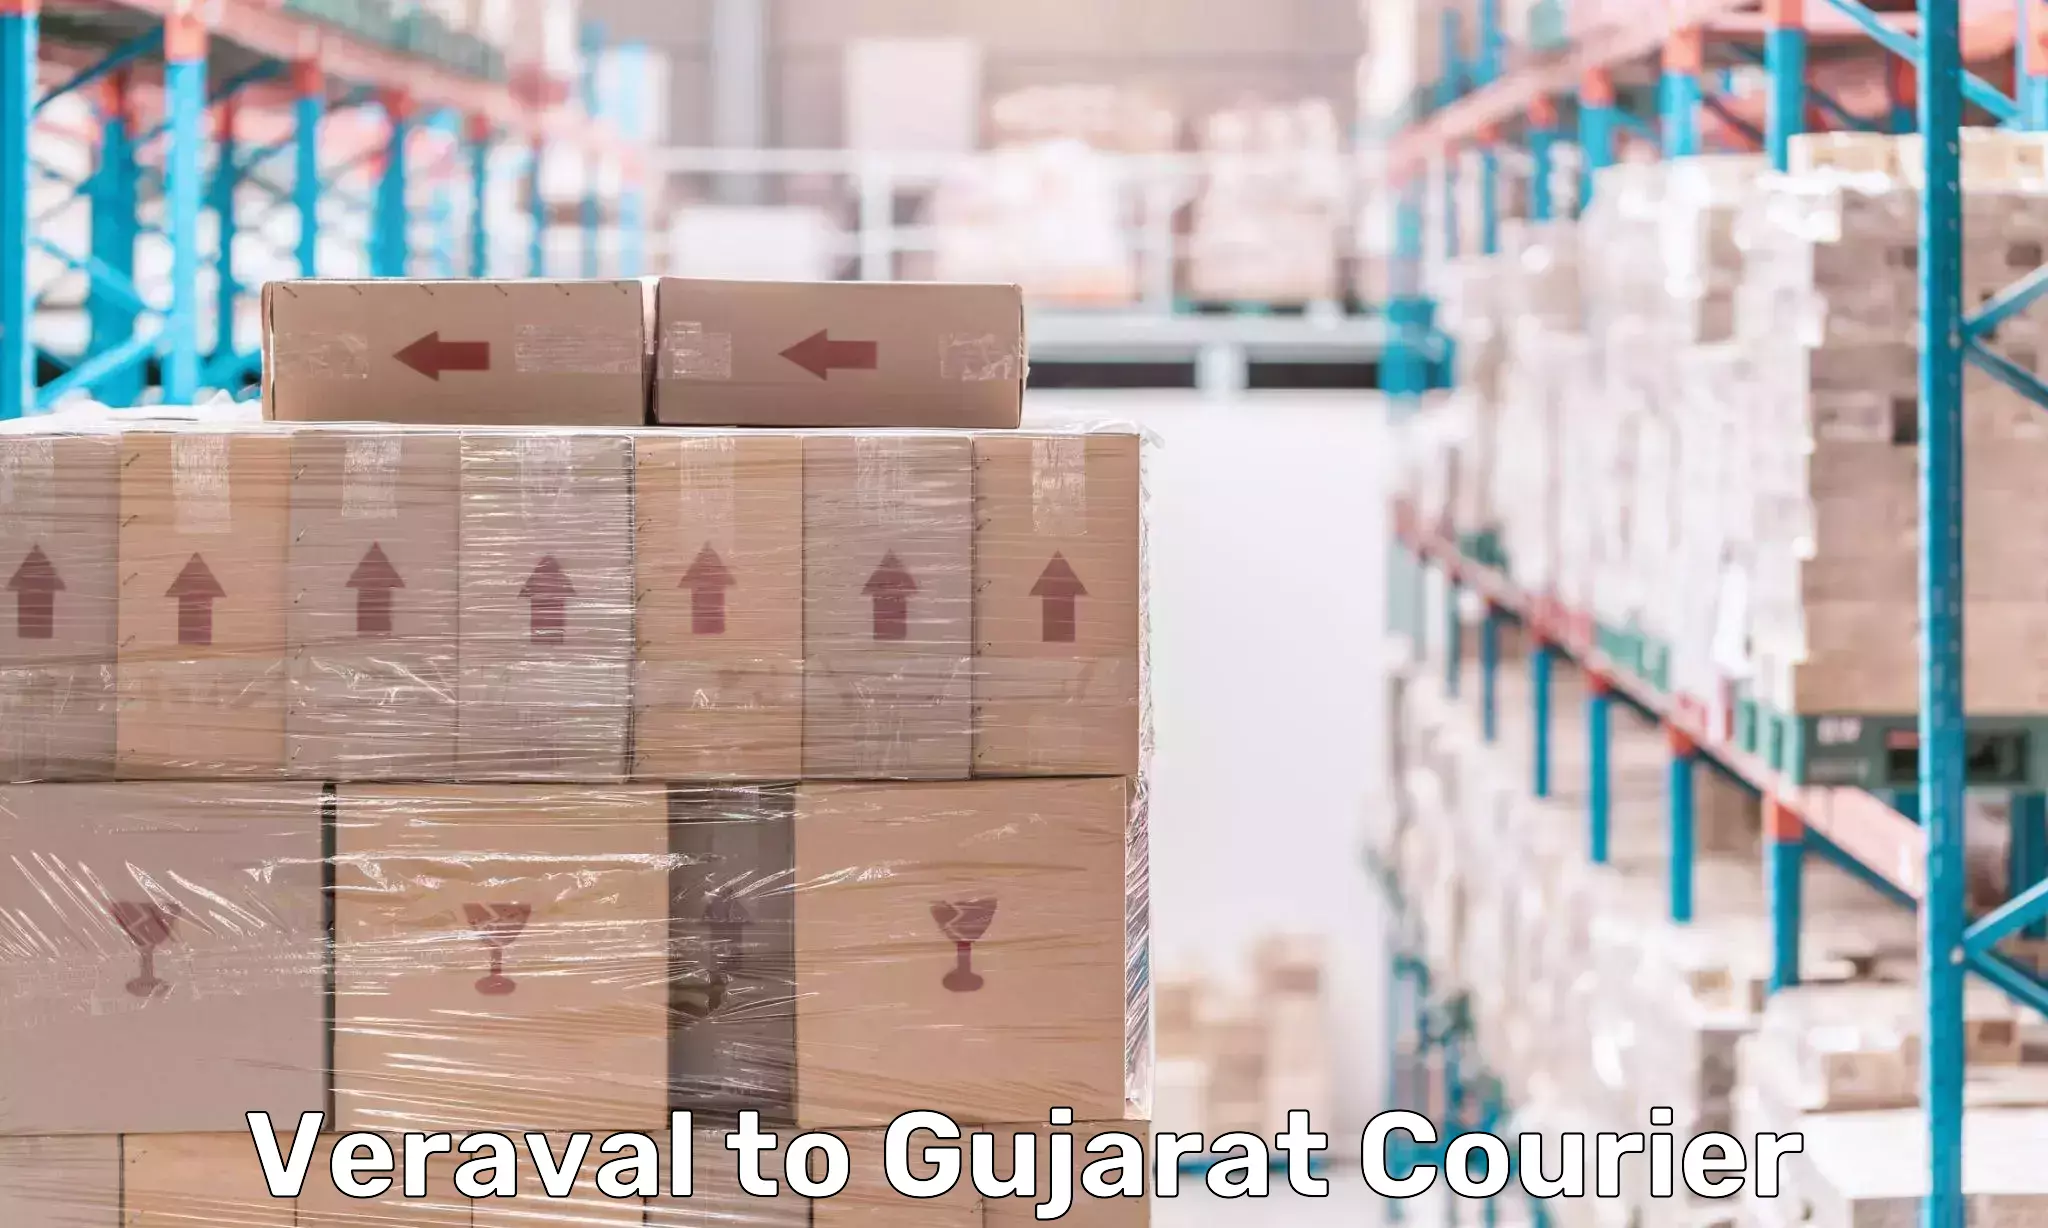 24/7 courier service Veraval to Ahmedabad